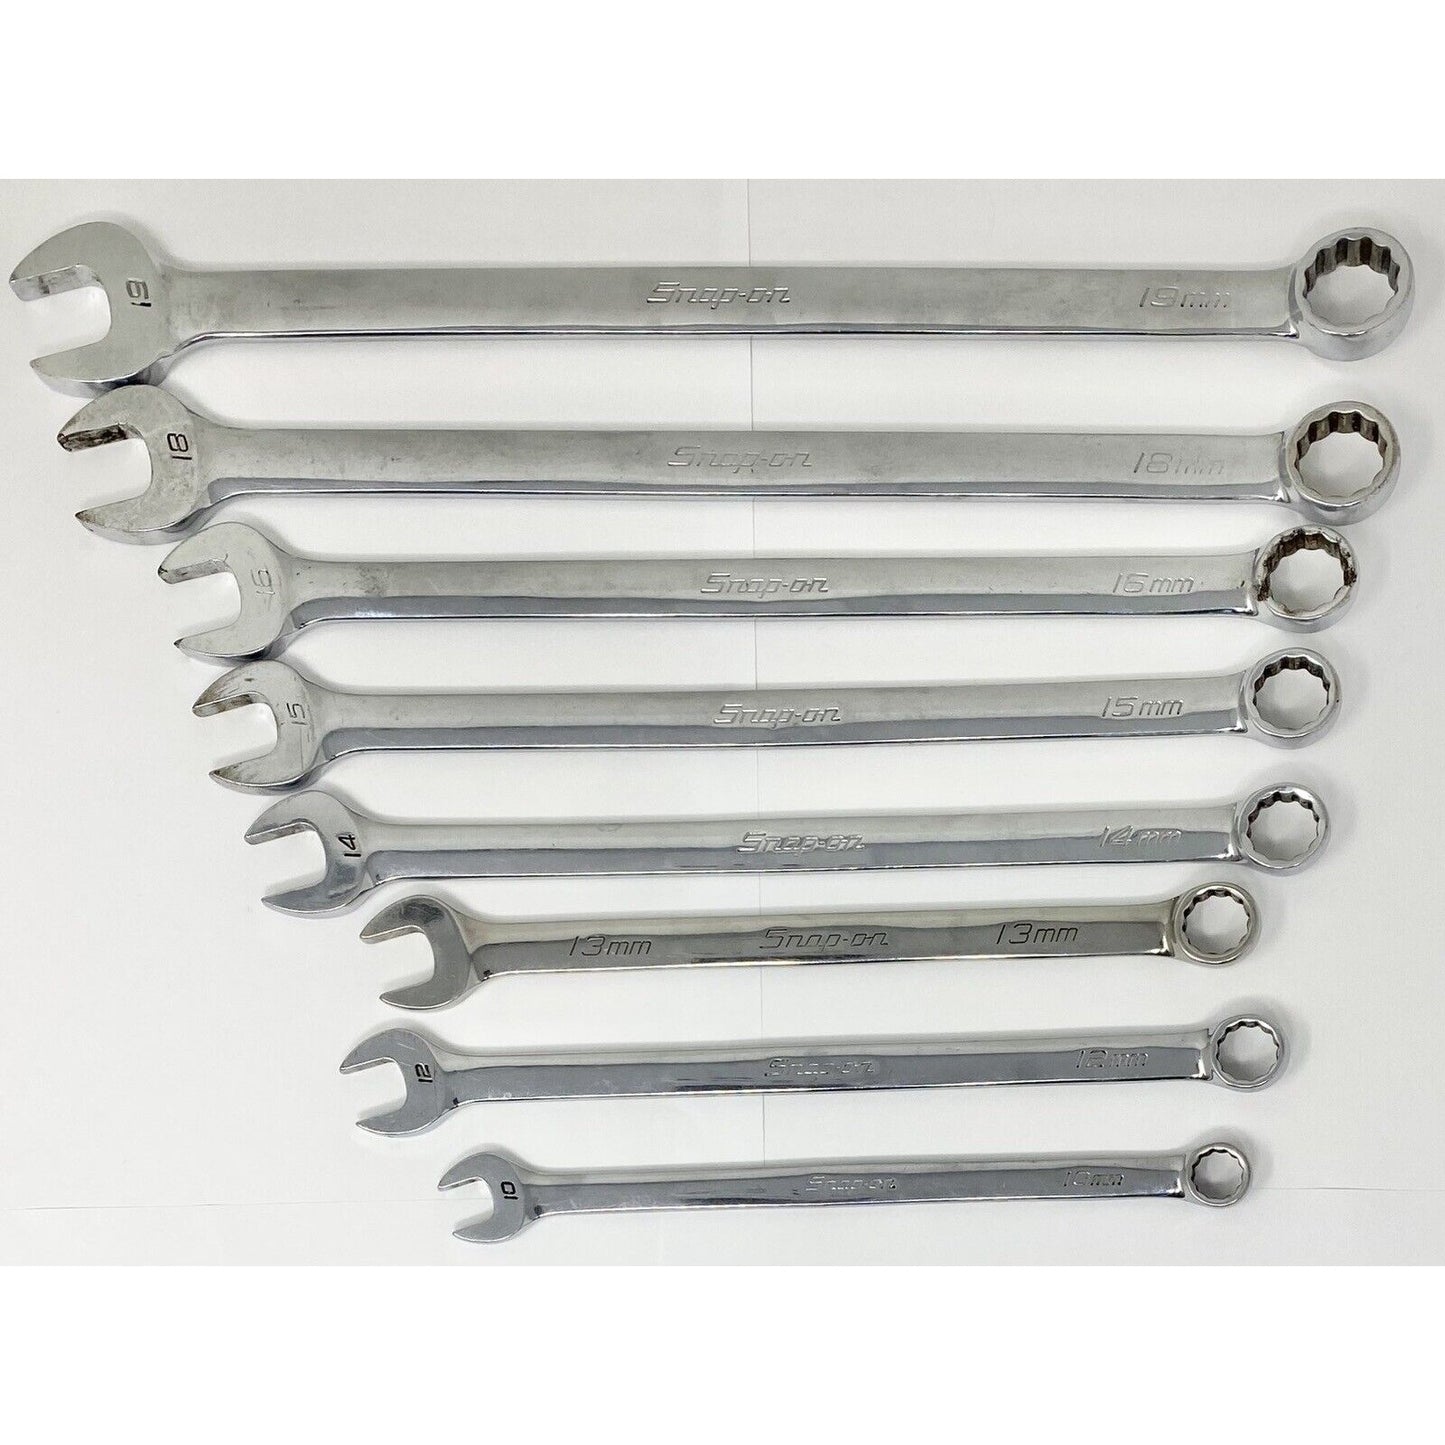 8pc Snap-On OEXLM 12Pt Metric Flank Dr Long Combination Wrench Set